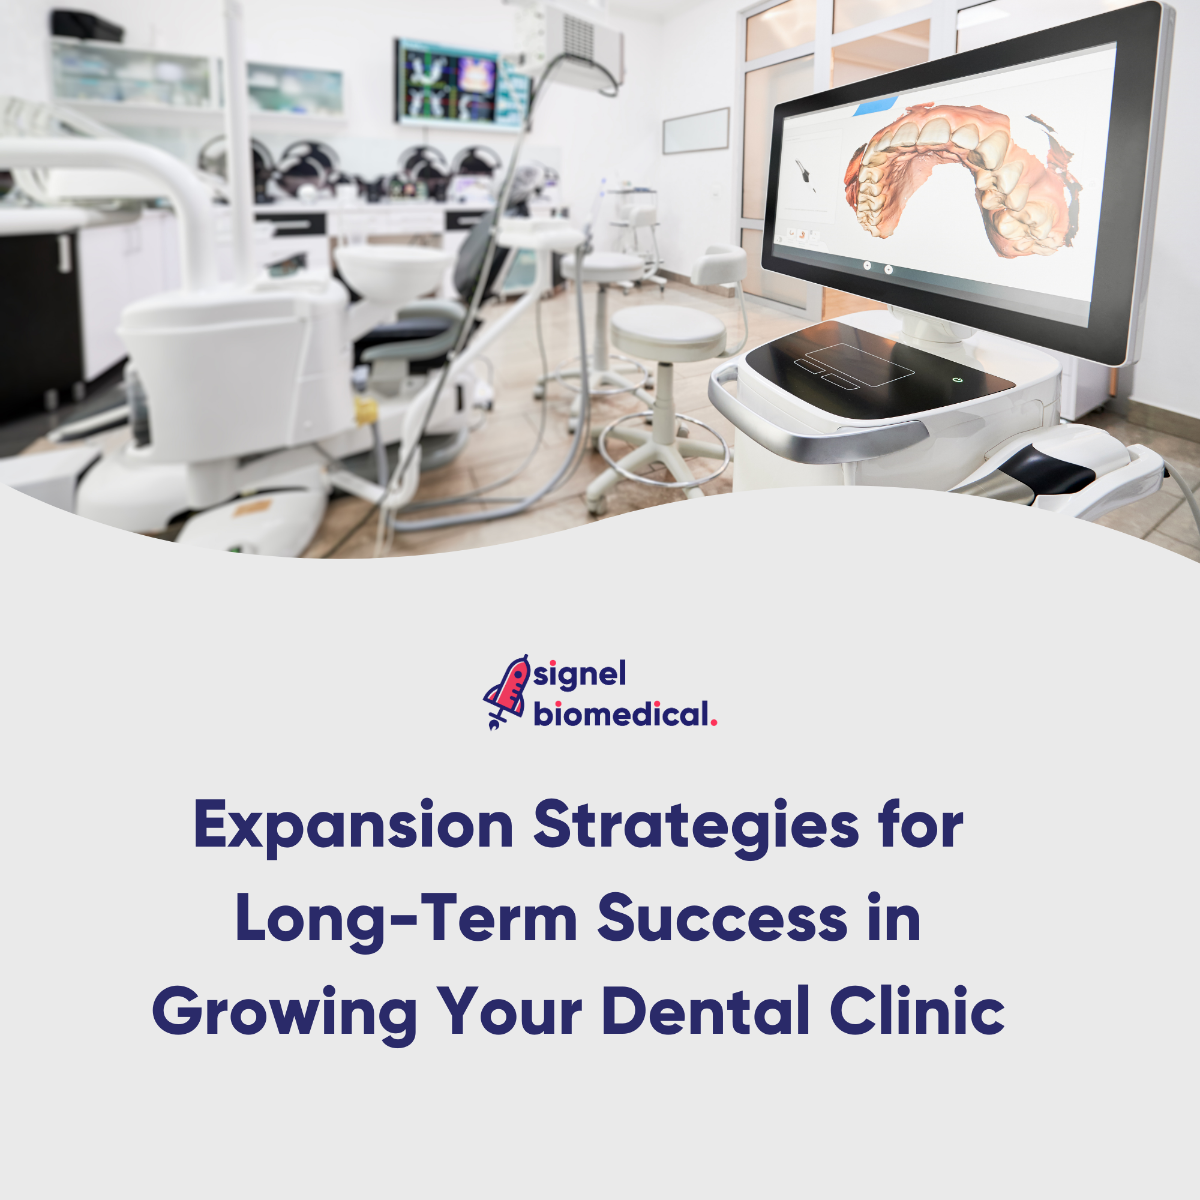 Unrevealing the dental clinic expansion ​strategies